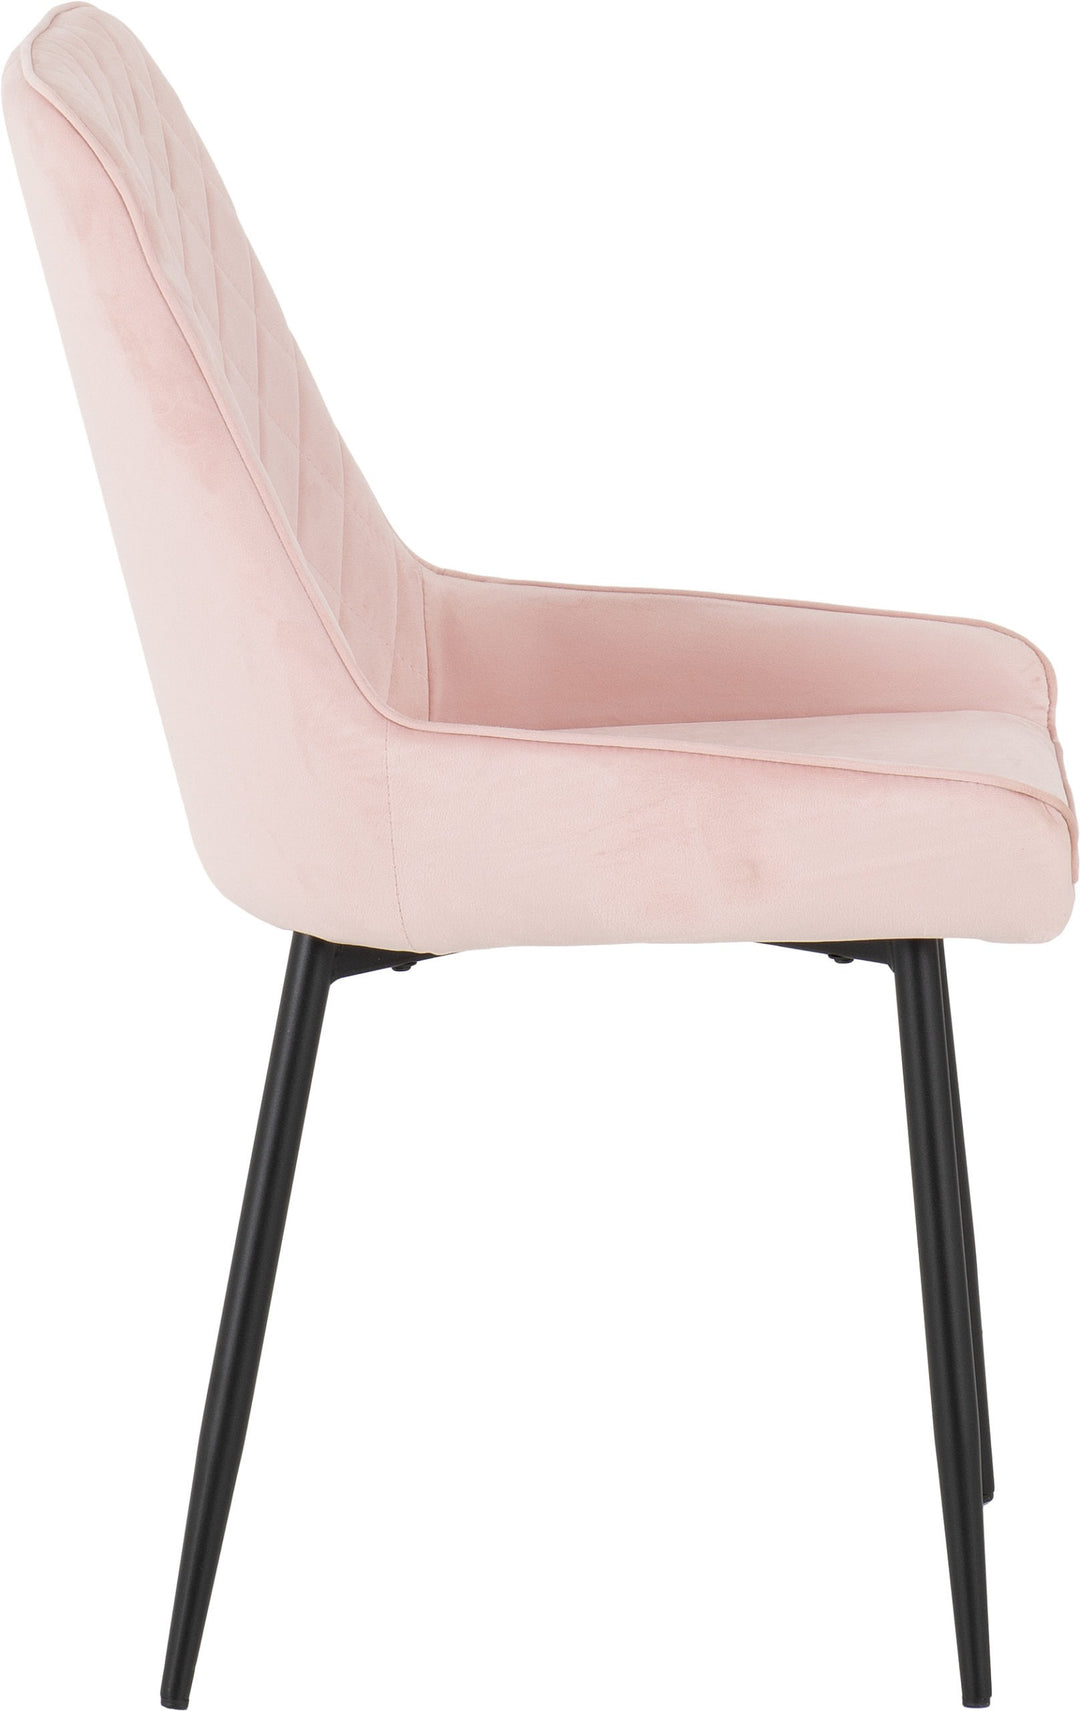 Avery Extending Dining Set (X4 Chairs) - Concrete/Baby Pink Velvet